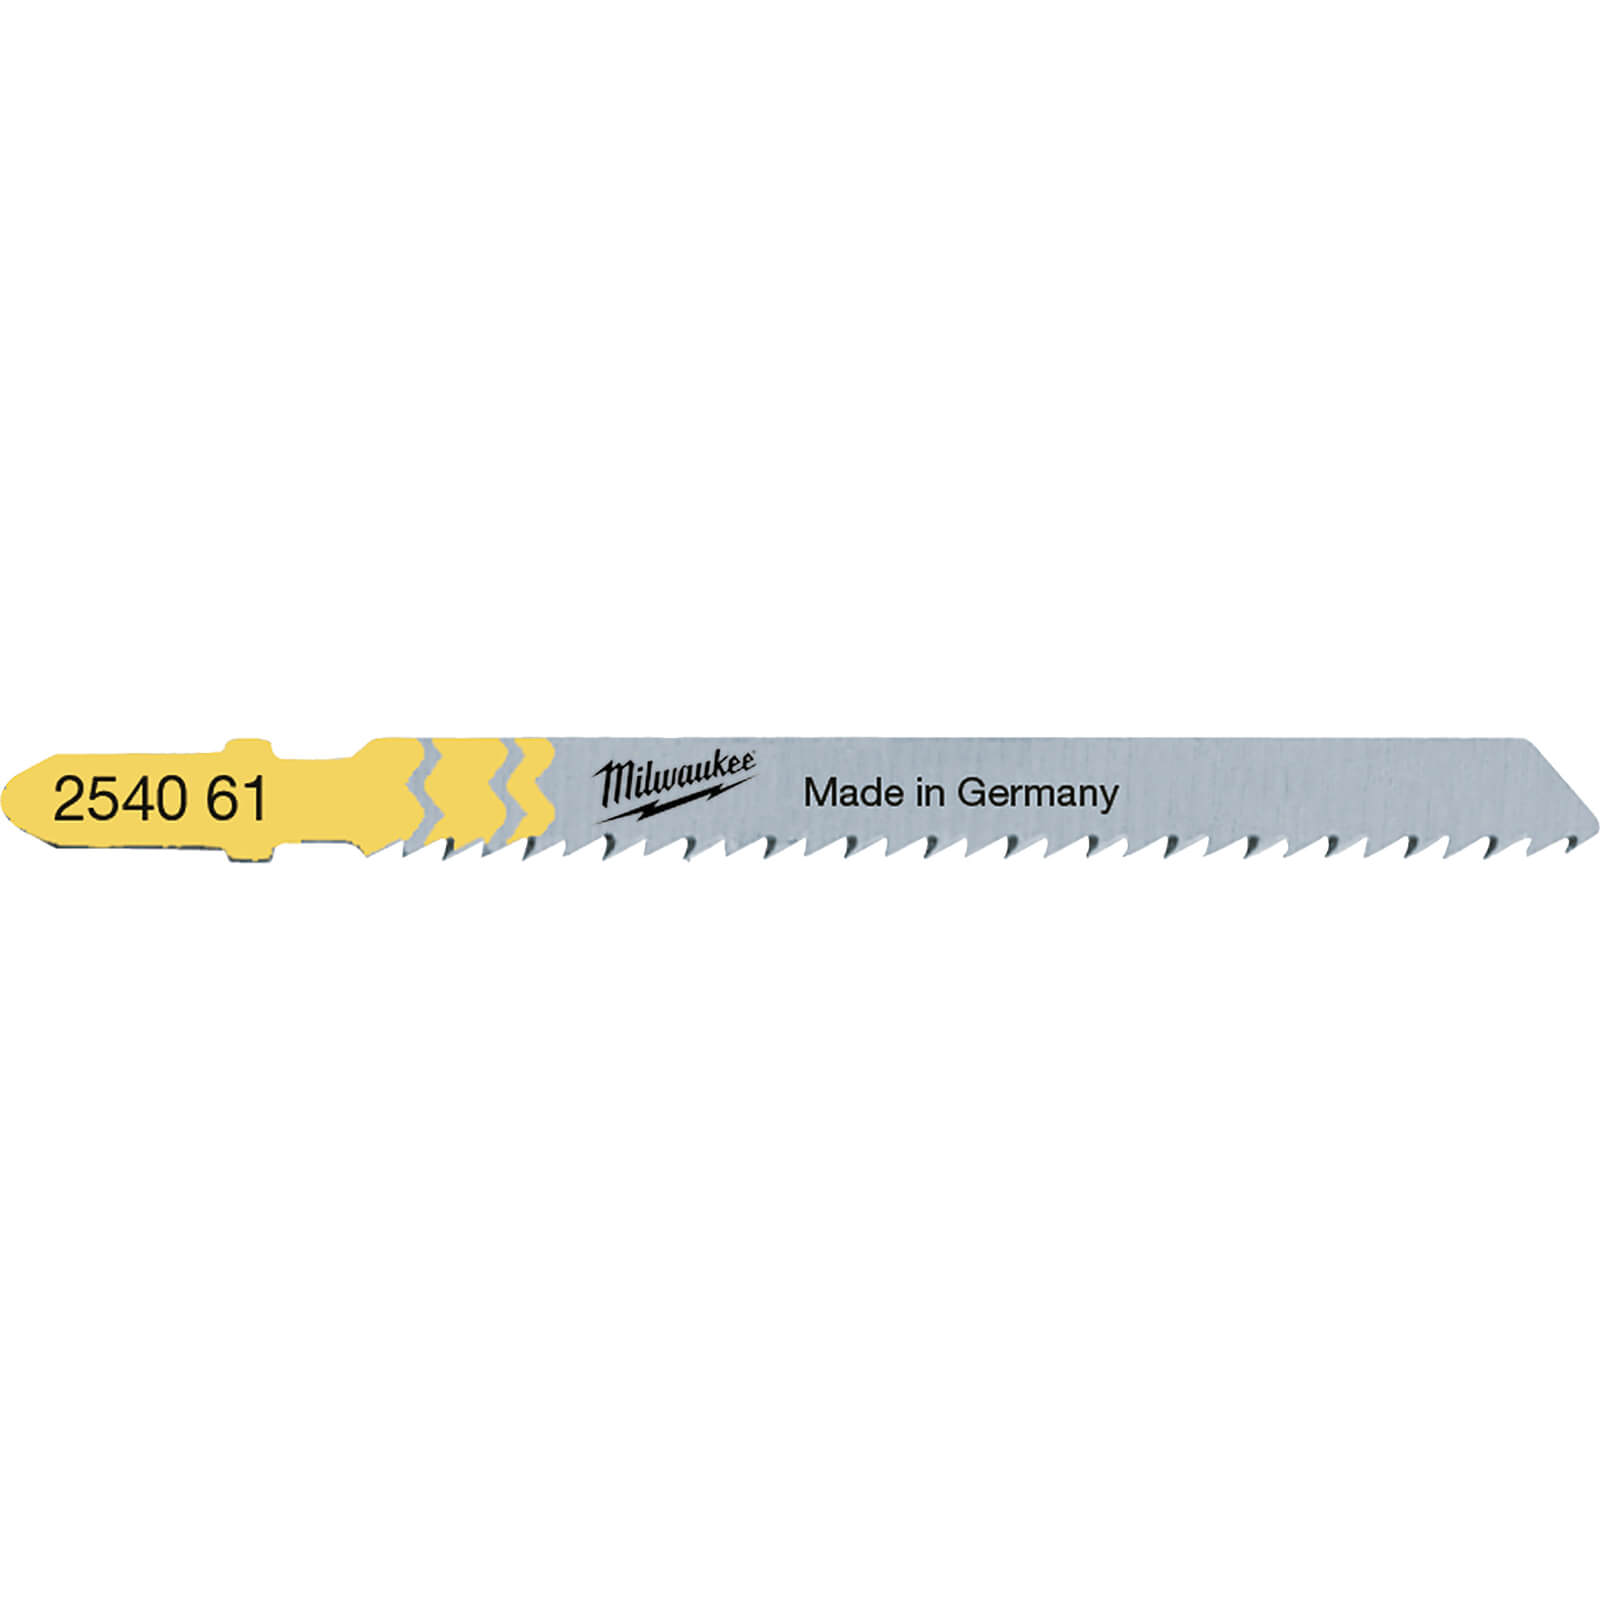 Image of Milwaukee T101B Wood Clean and Splinter Free Cutting Jigsaw Blades Pack of 25